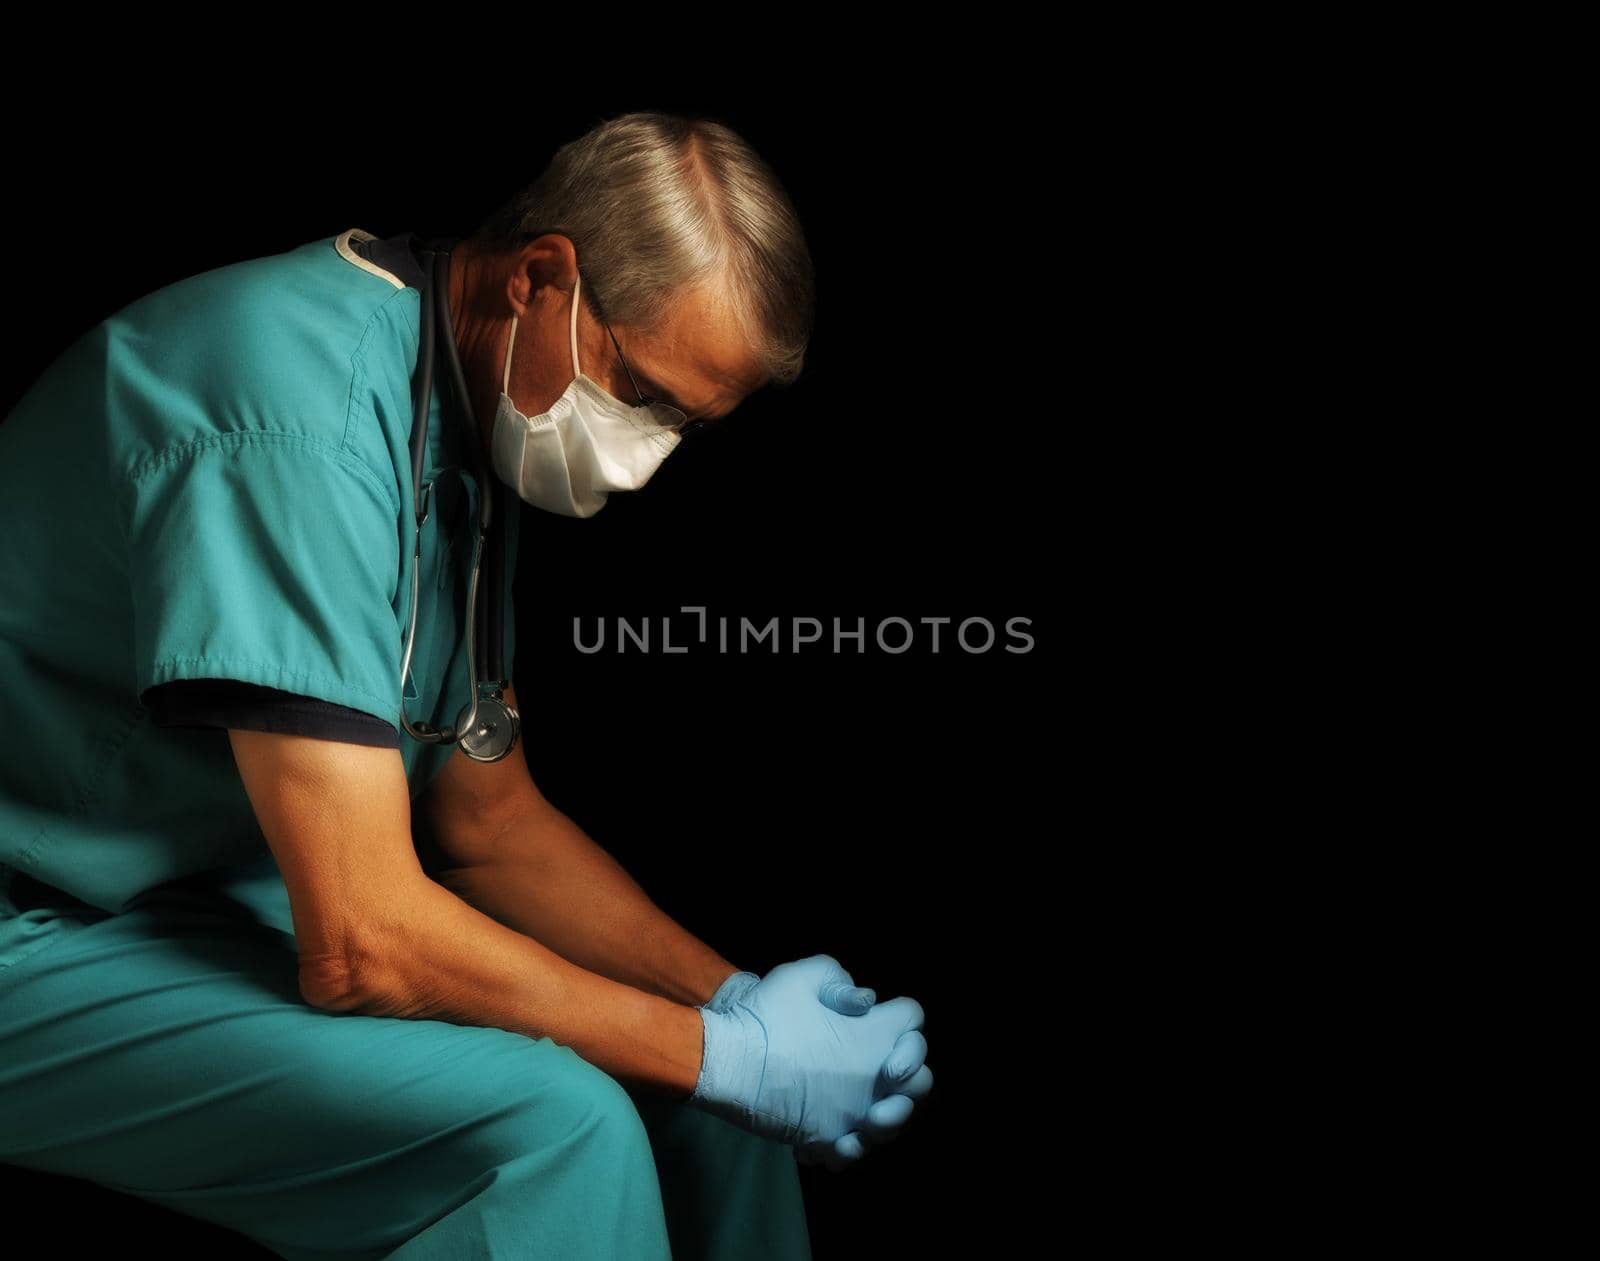 Exhausted Middle Aged doctor in scrubs, gloves and mask sitting with head down amid the Covid-19 crisis, profile portrait against black. by sCukrov